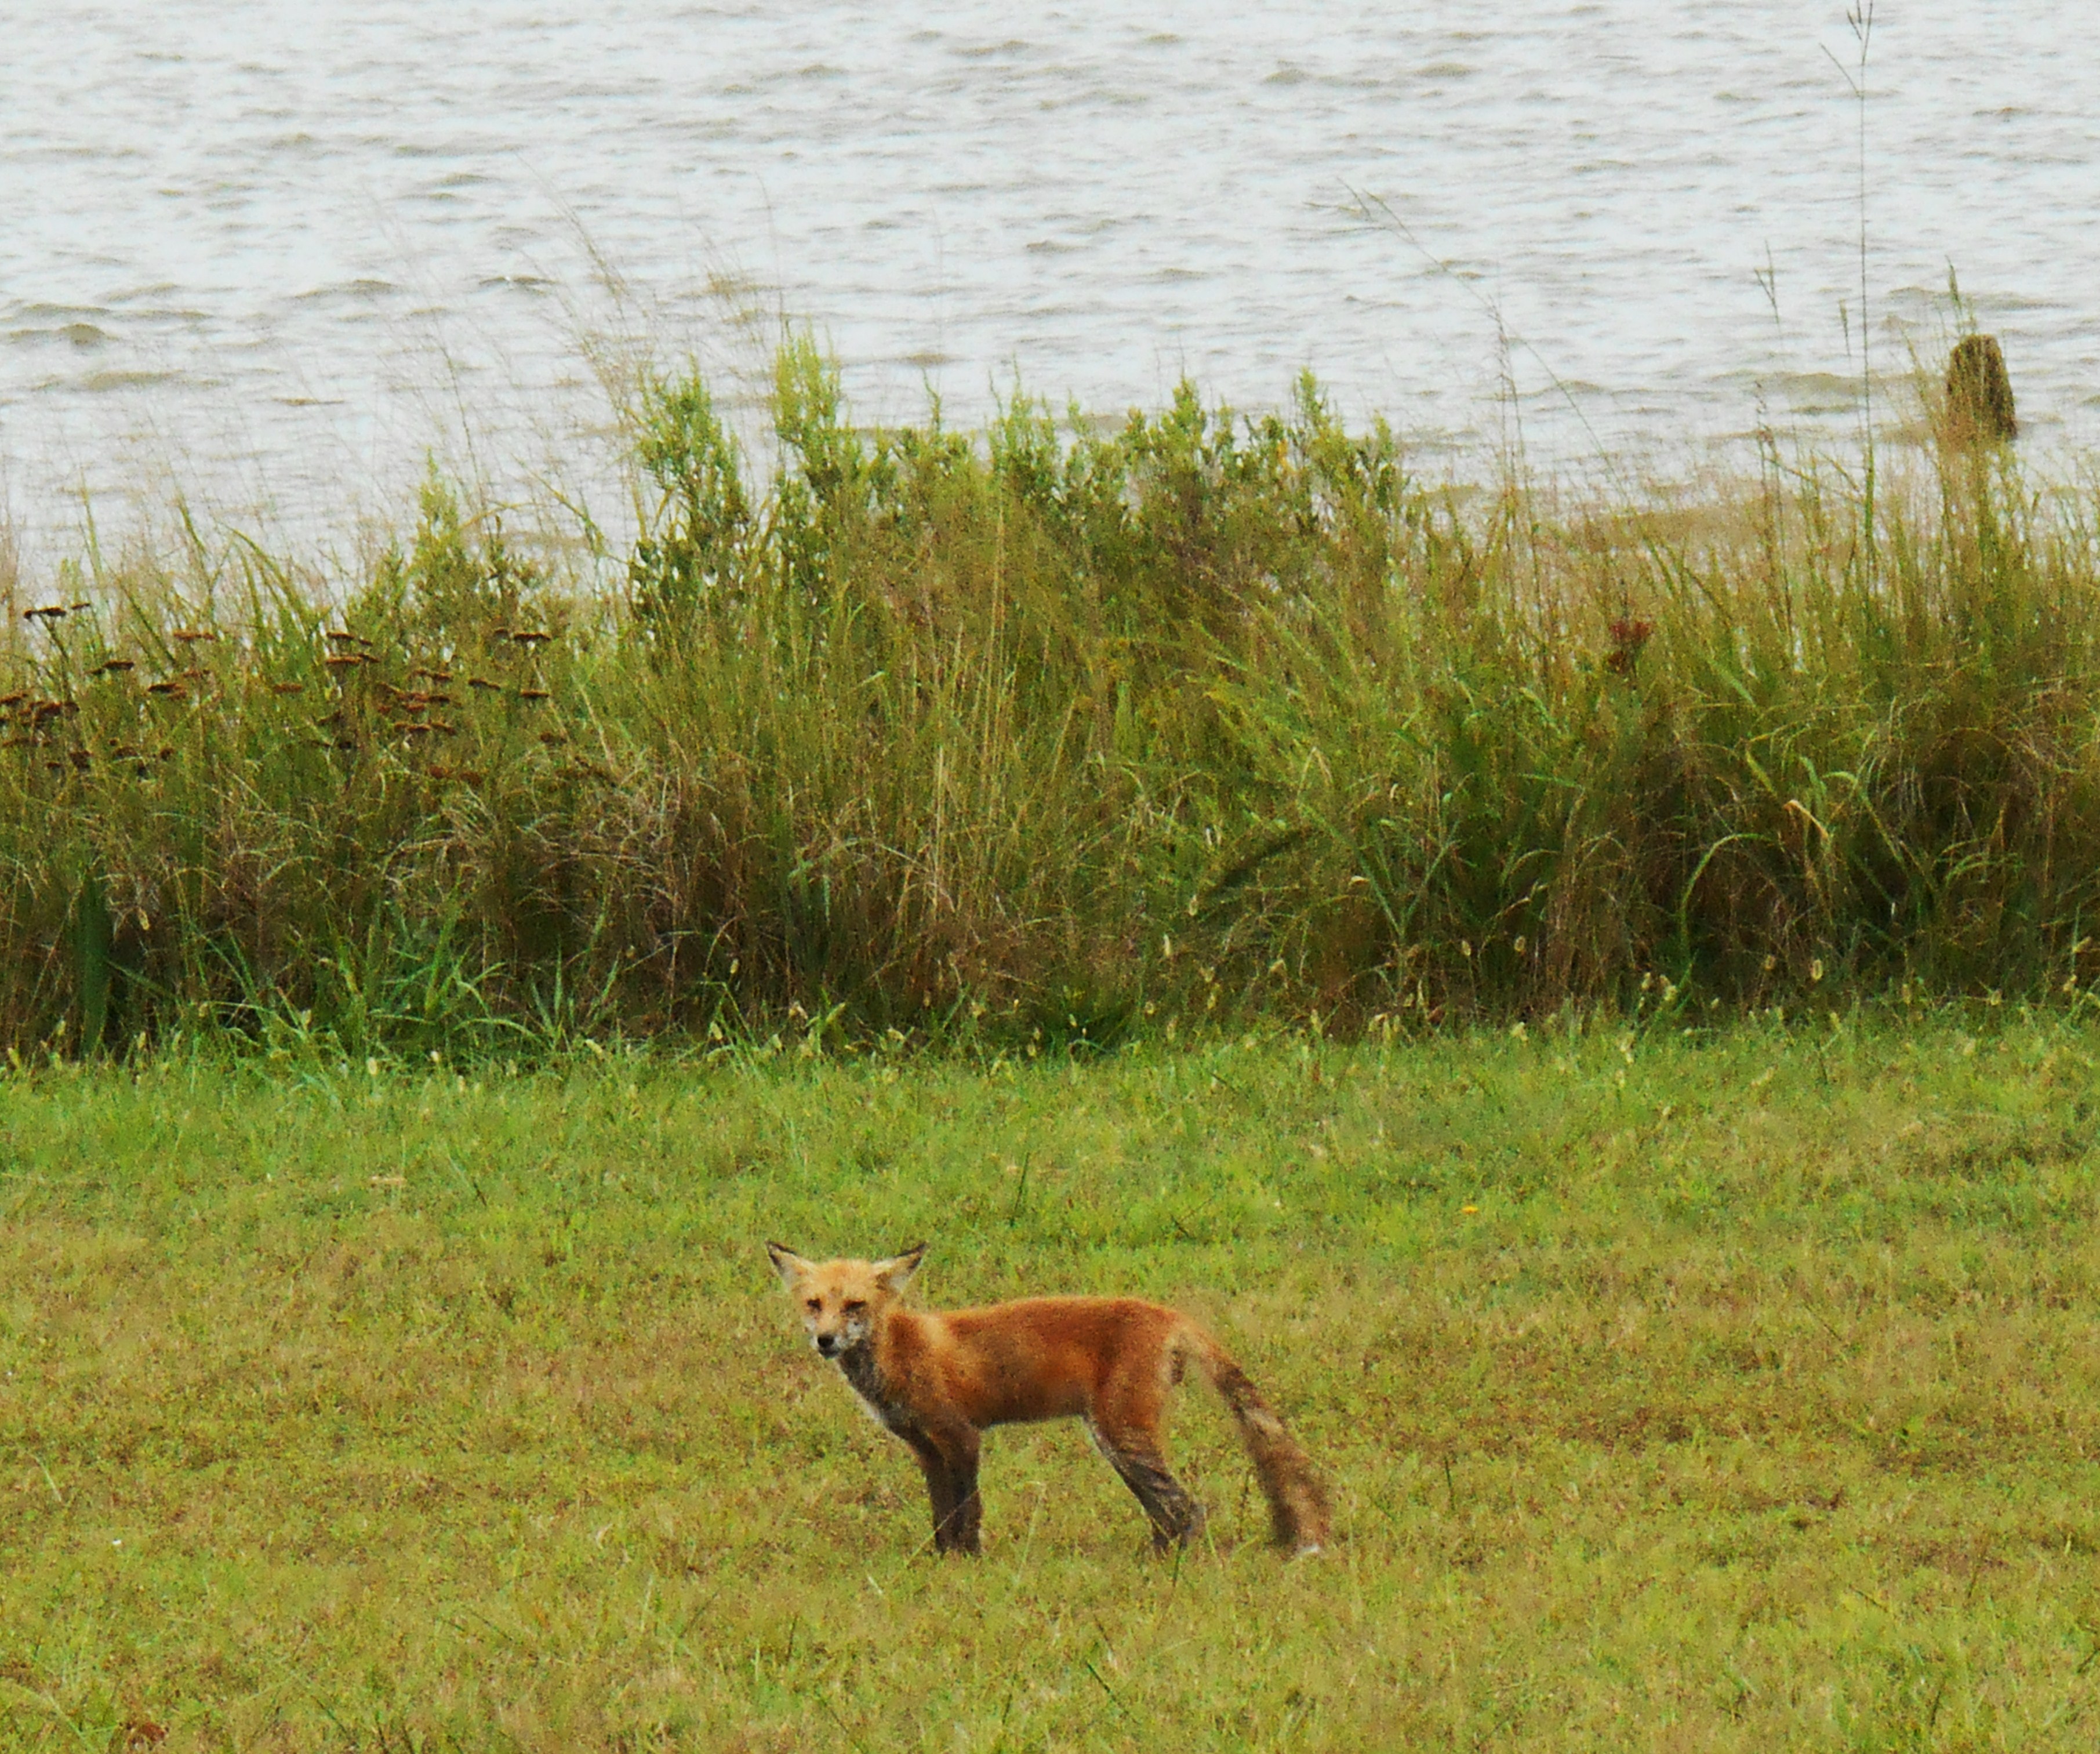 The fox who came out near Jamestown  Island this afternoon.